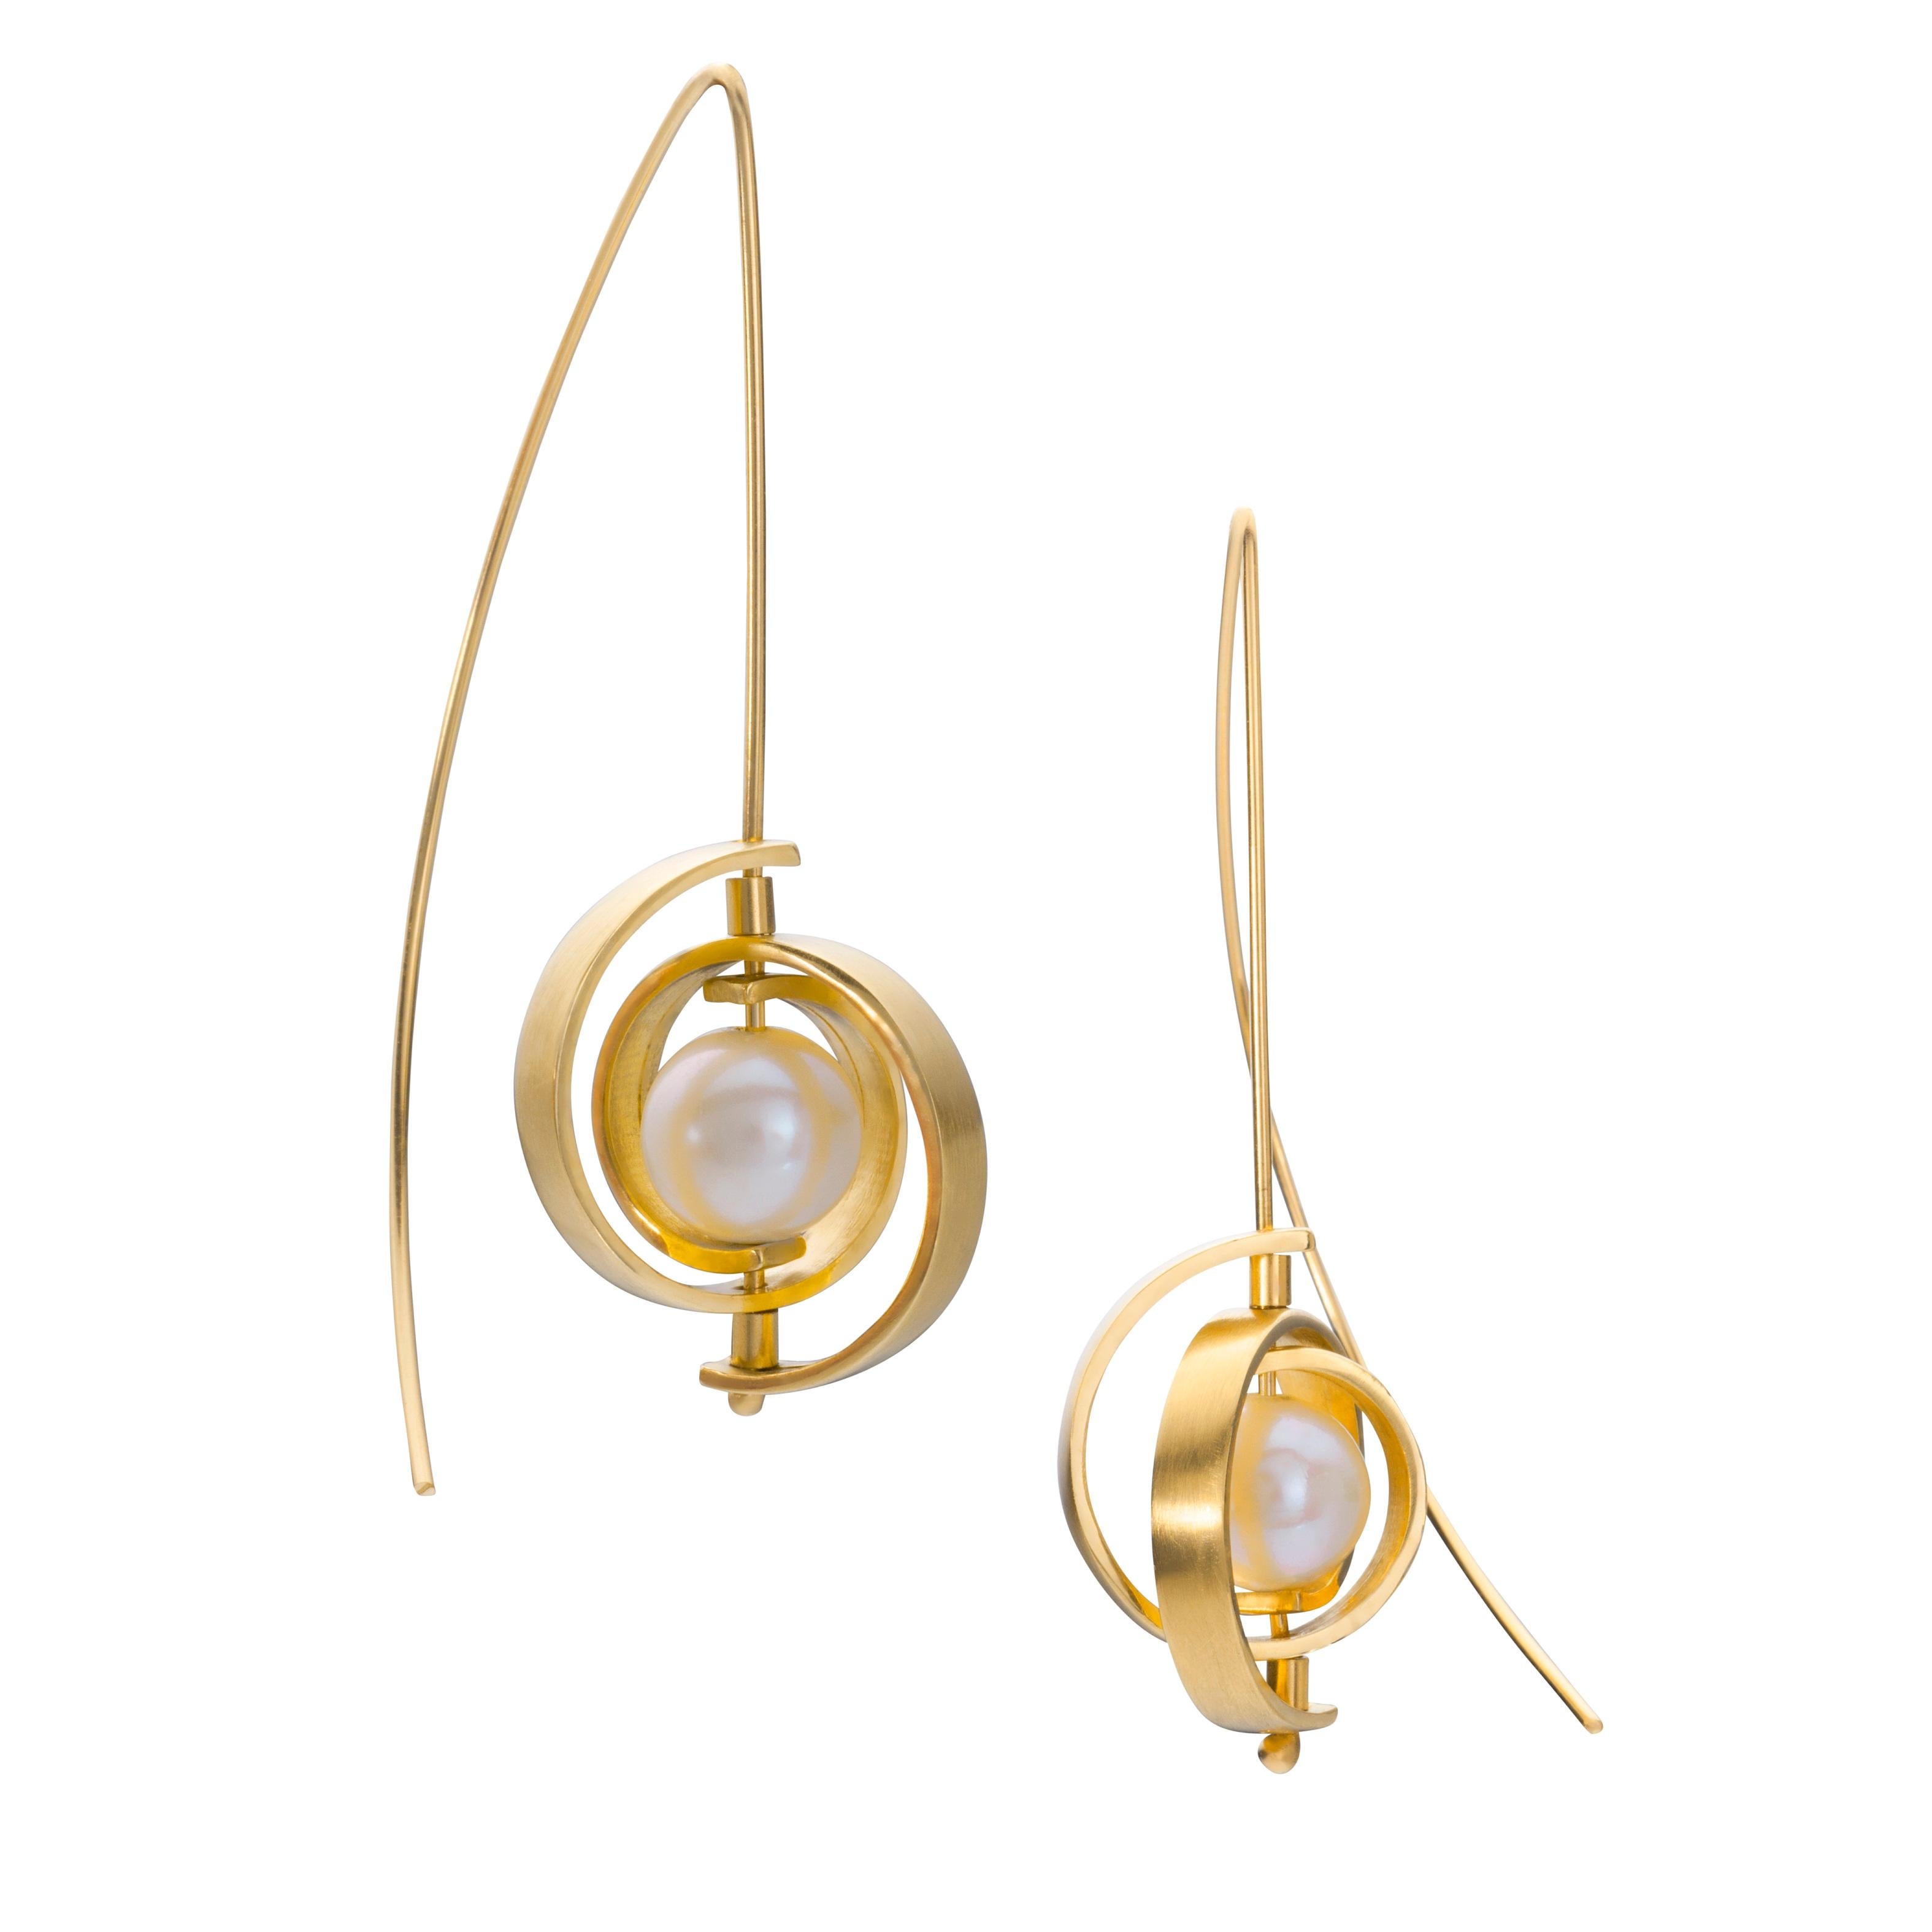 These pearl earrings are the new power pearls - definitely NOT your grandmother's pearls. They are Medium Spiral Dangle Earrings from the Orbit collection in 14k spirals with a 20 gauge ear wire and a lustrous, 7-8.5mm Akoya pearl. The earrings hang